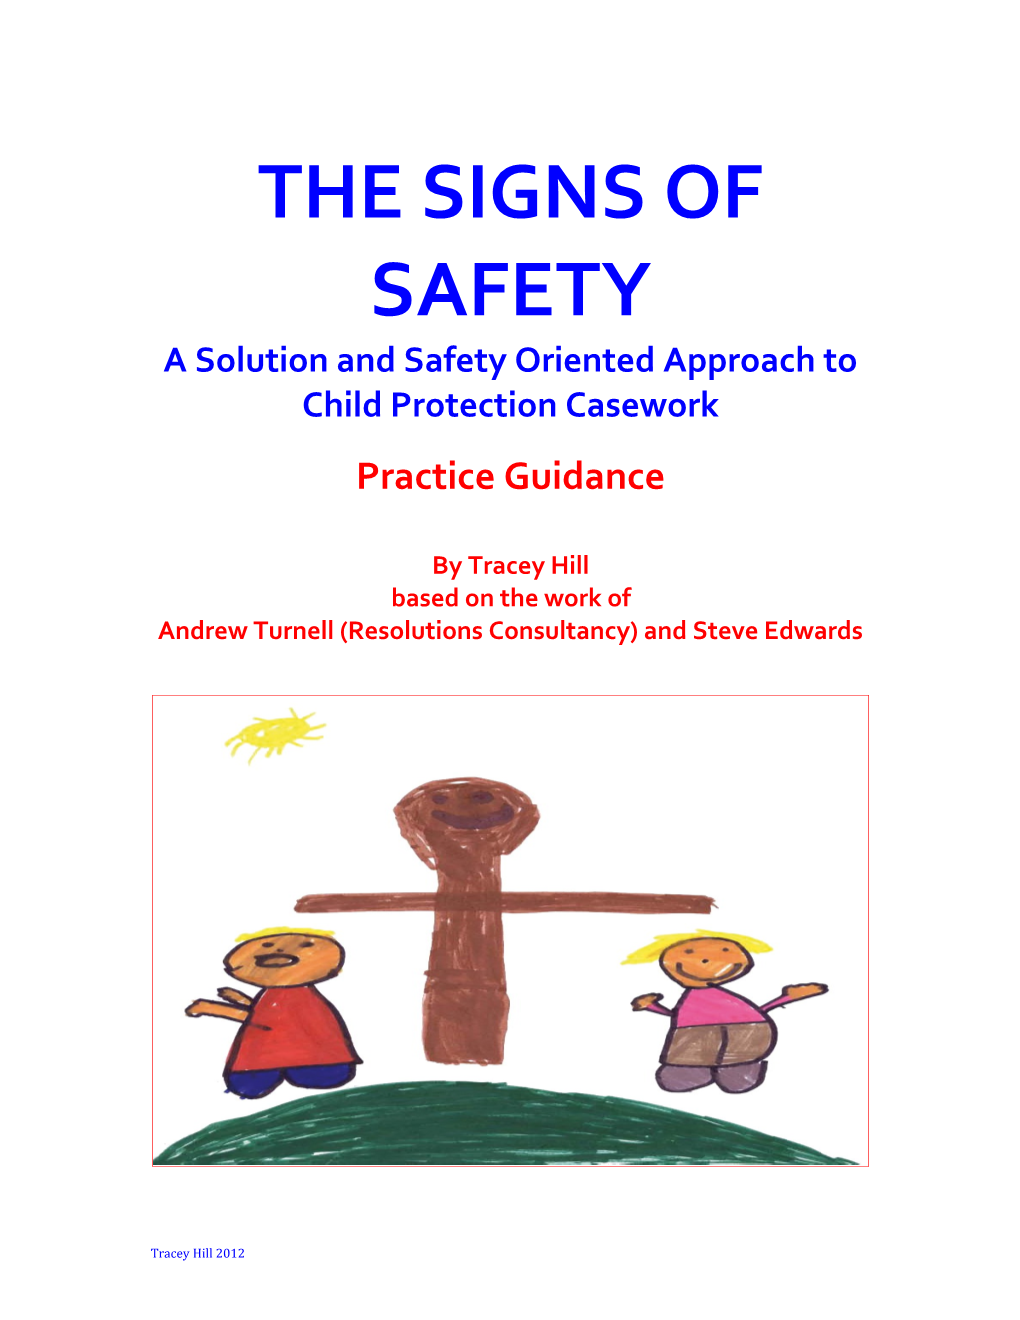 A Solution and Safety Oriented Approach to Child Protection Casework